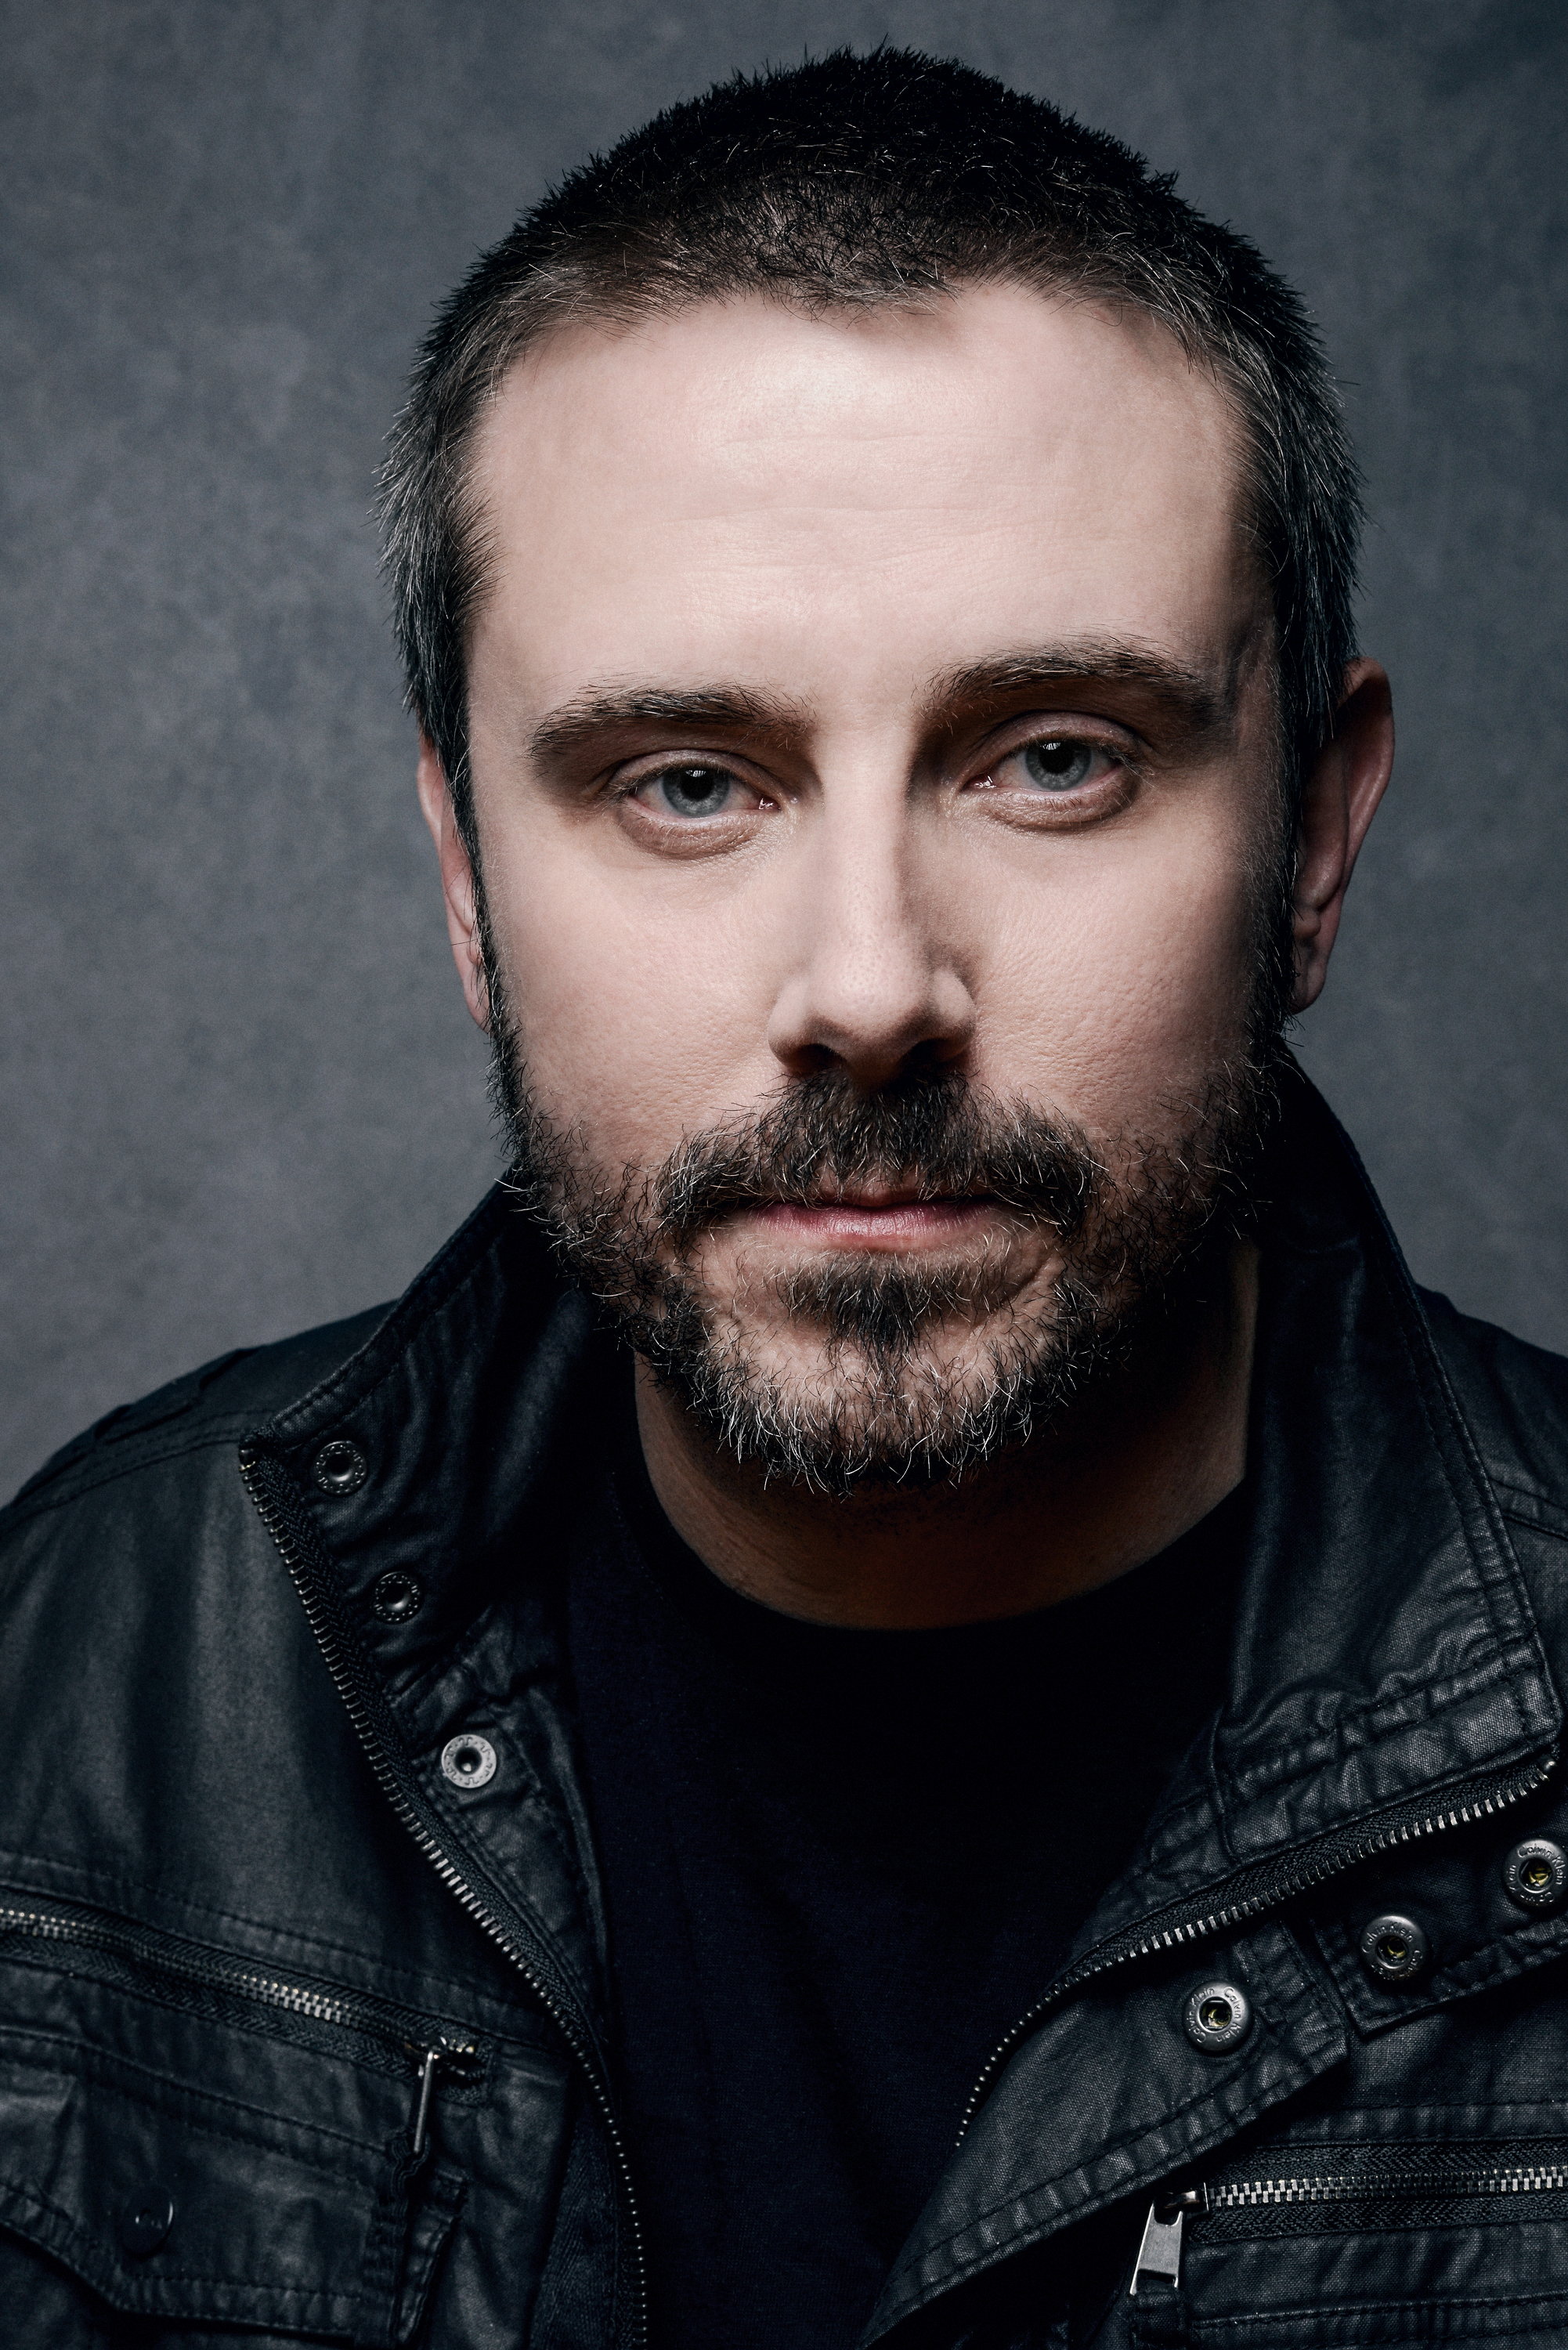 PARK CITY, UT - JANUARY 22: Writer Jeremy Scahill poses for a portrait during the 2013 Sundance Film Festival at the WireImage Portrait Studio at Village At The Lift on January 22, 2013 in Park City, Utah. (Photo by Jeff Vespa/WireImage)